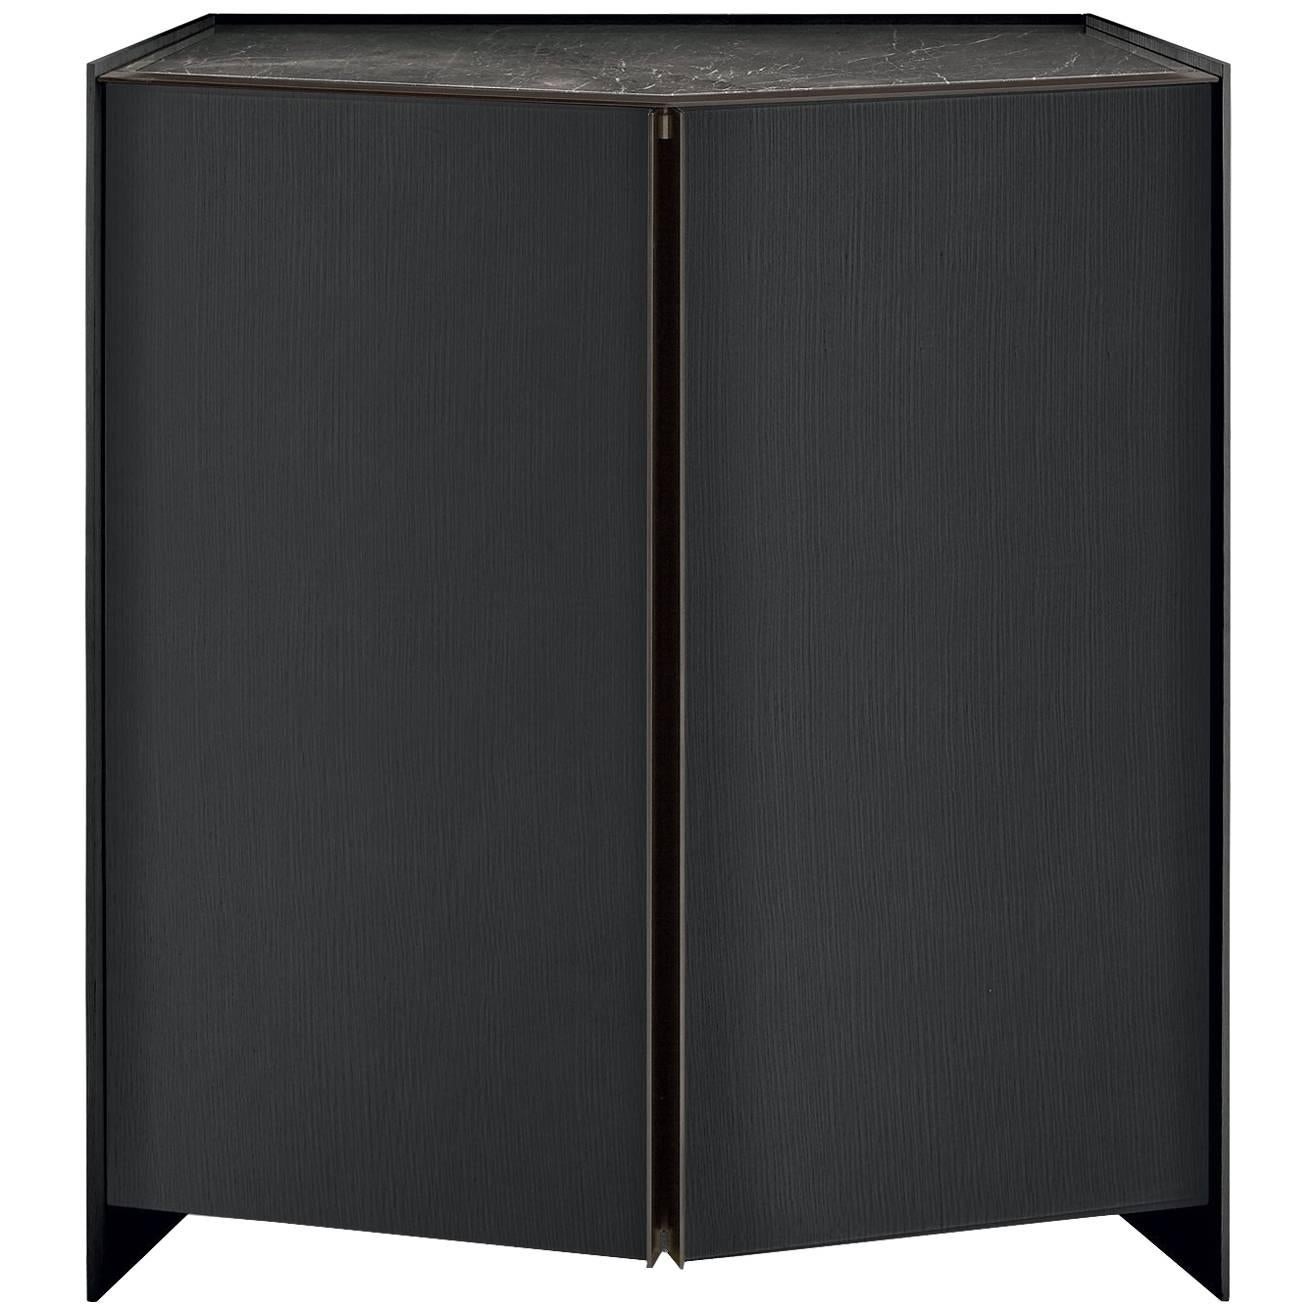 Gallott & Radice Athus Cabinet in Black Open Pore Lacquered Ash and Marble For Sale